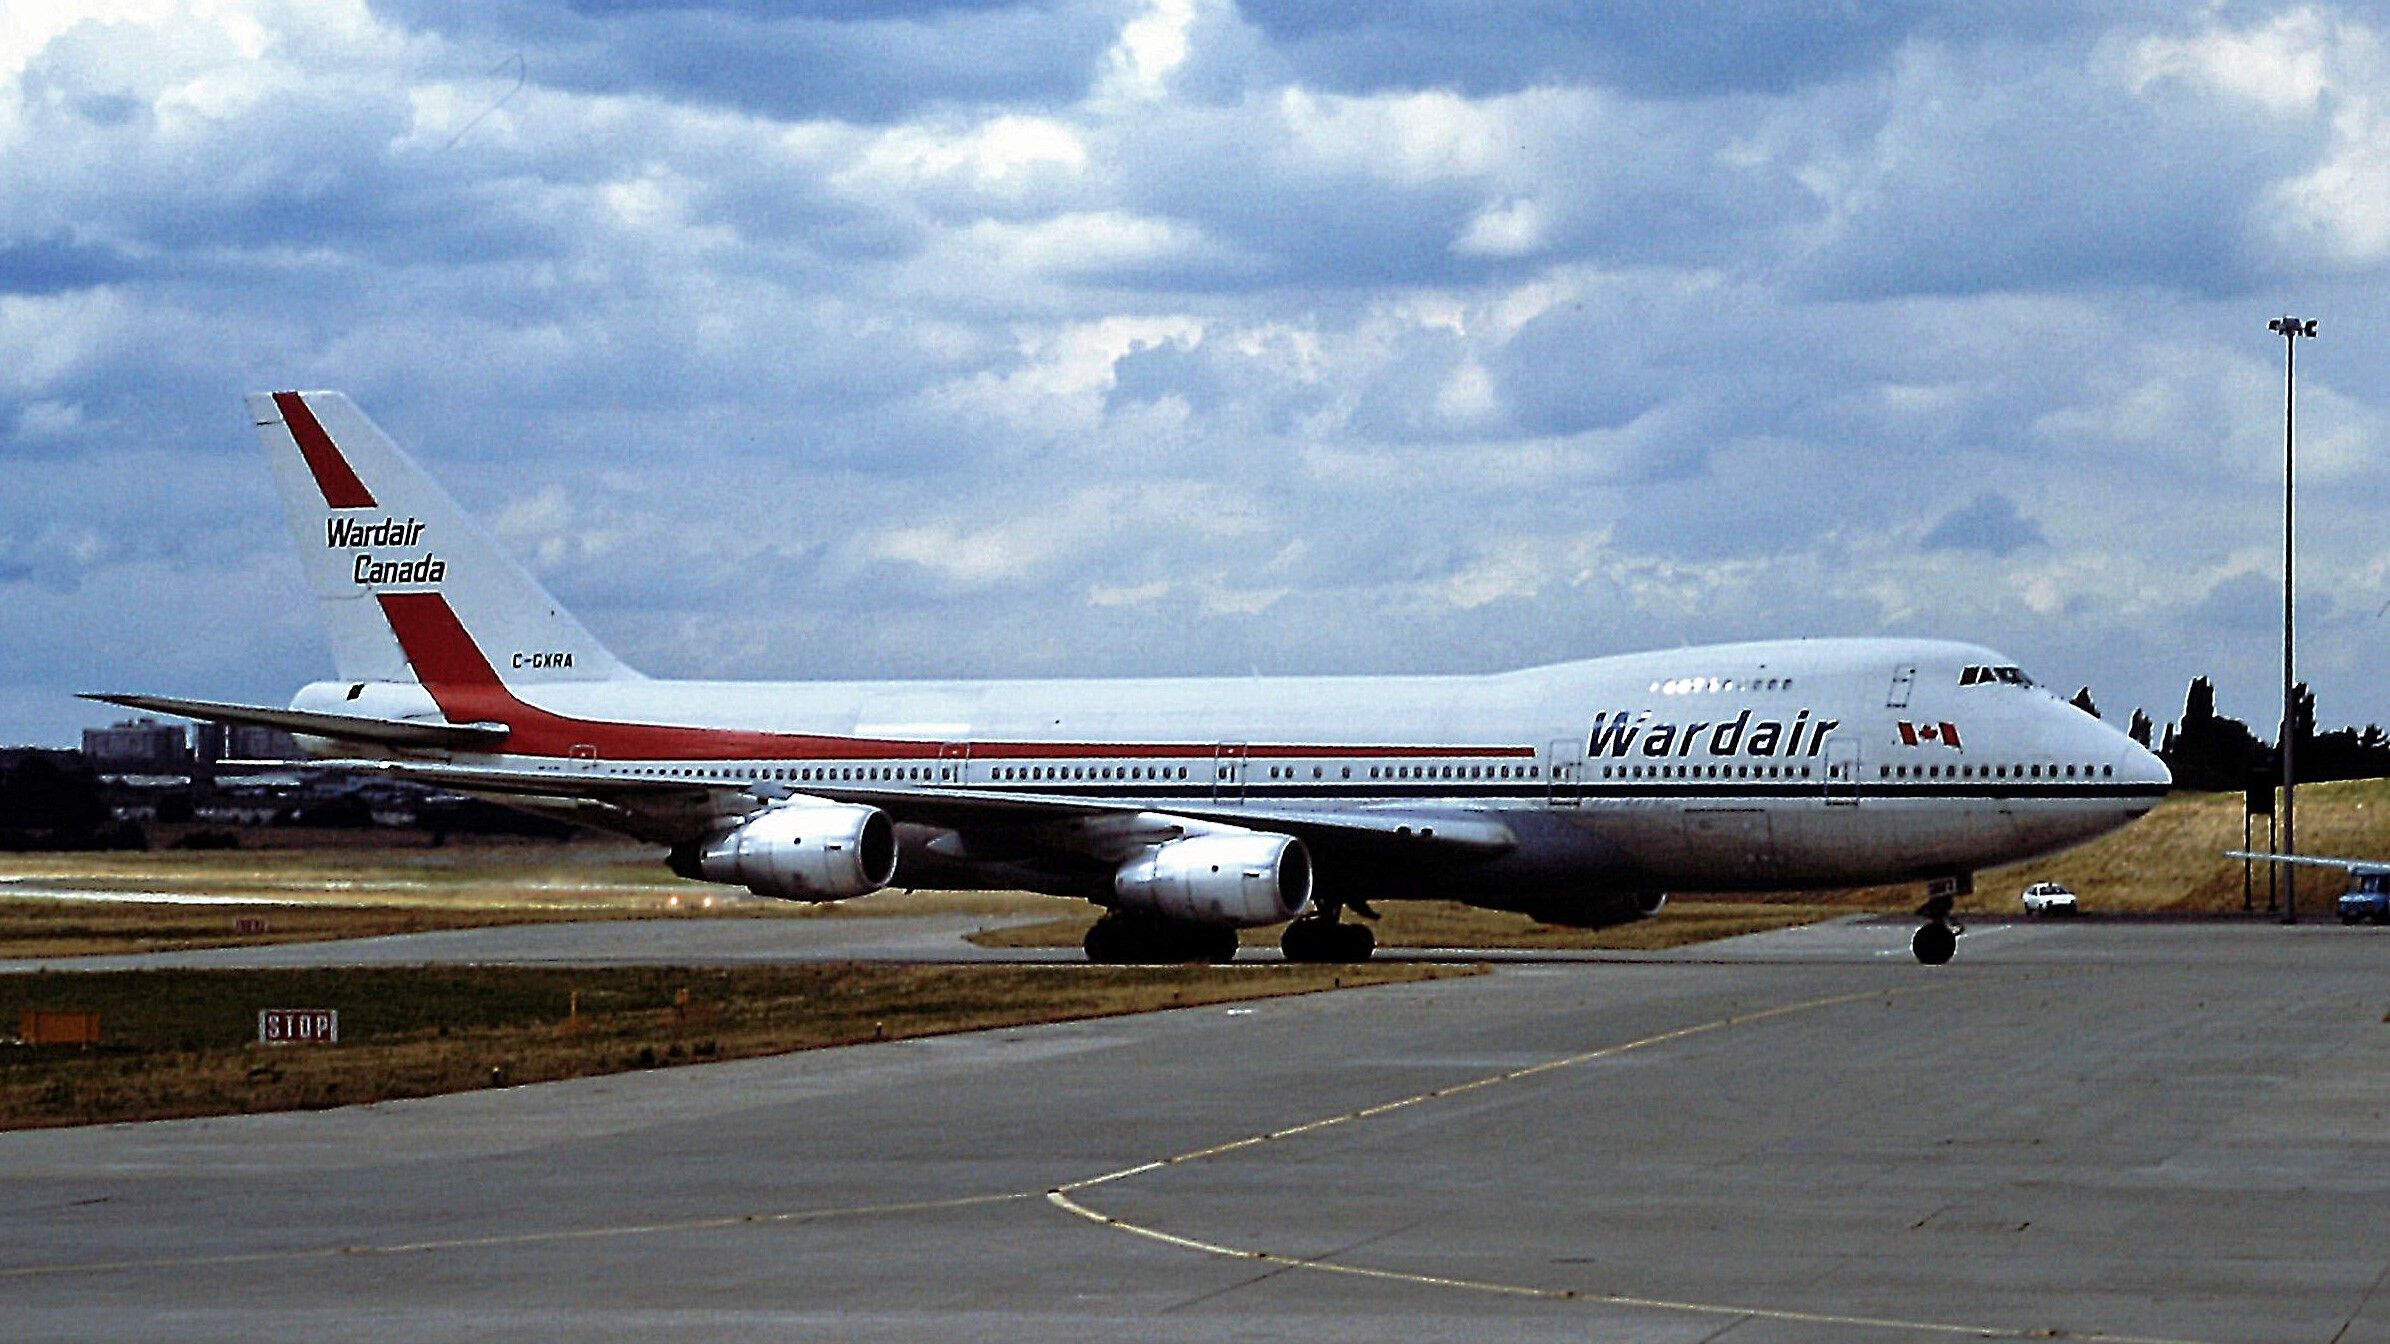 A Wardair Boeing 747-200 on an airport apron.